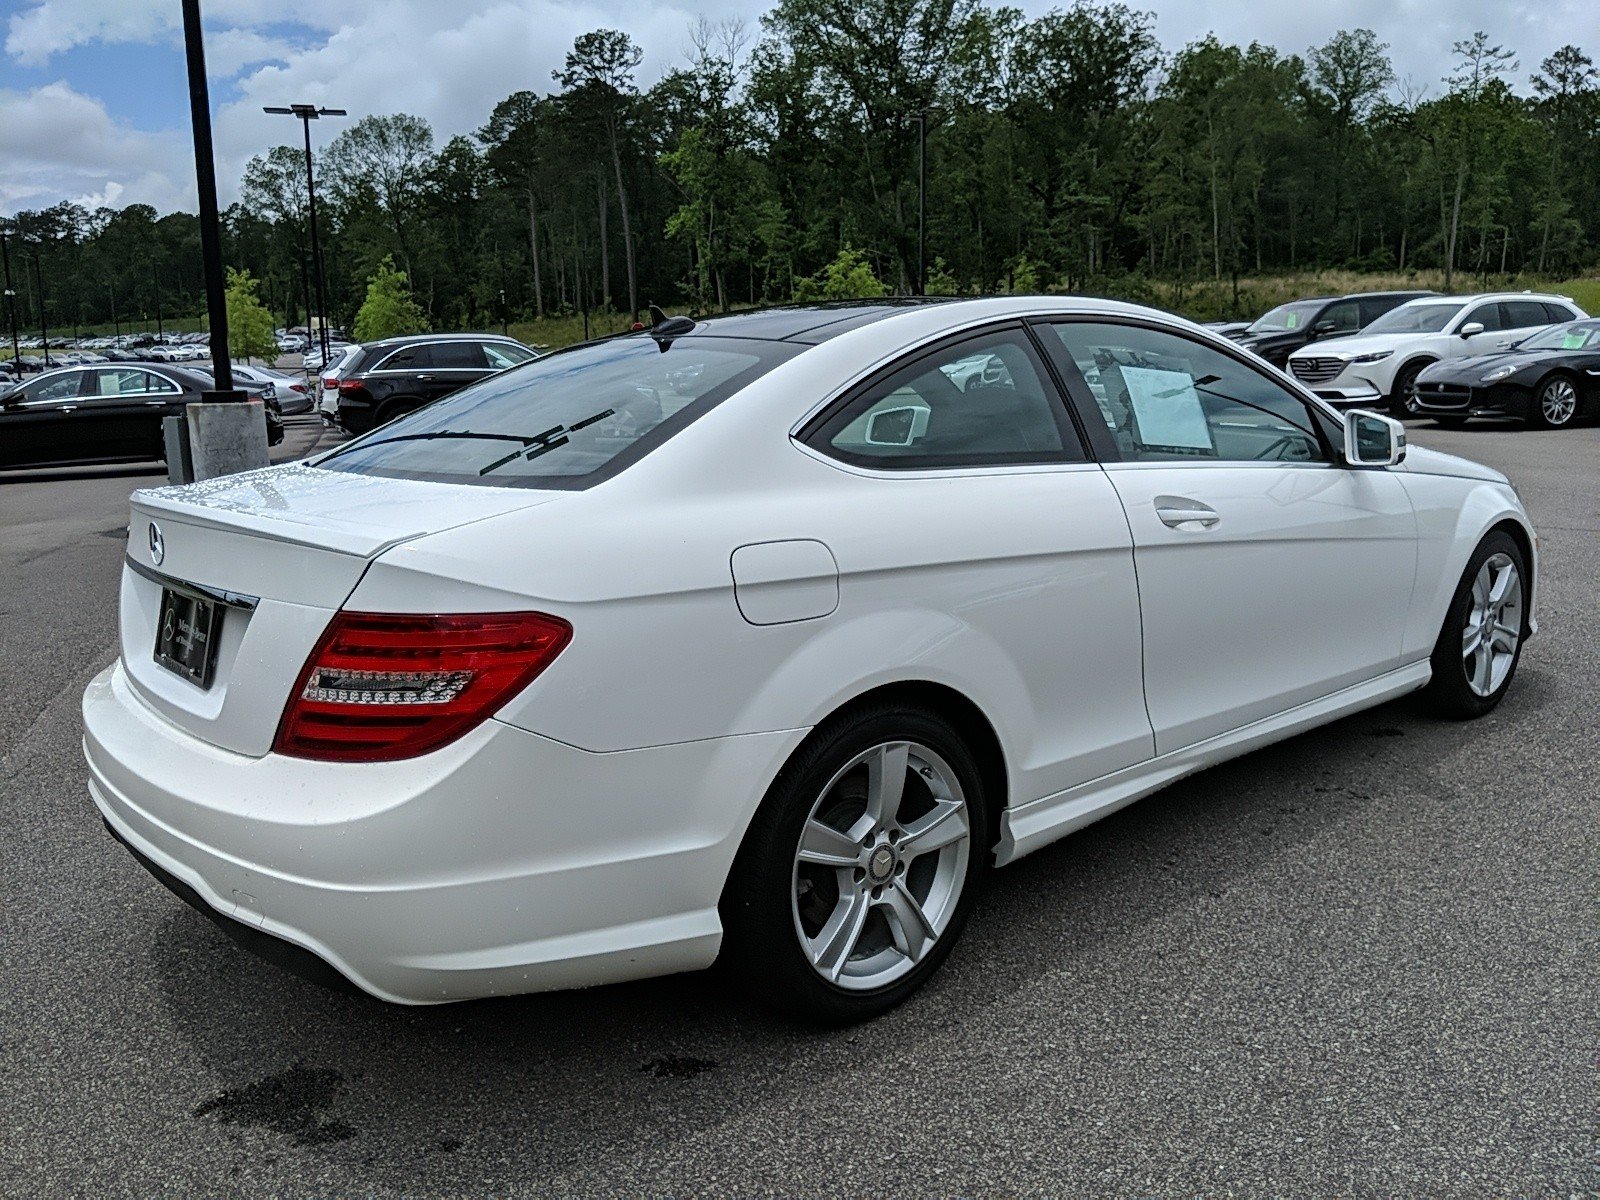 Pre-Owned 2013 Mercedes-Benz C-Class C 250 COUPE in Irondale #U981582 ...